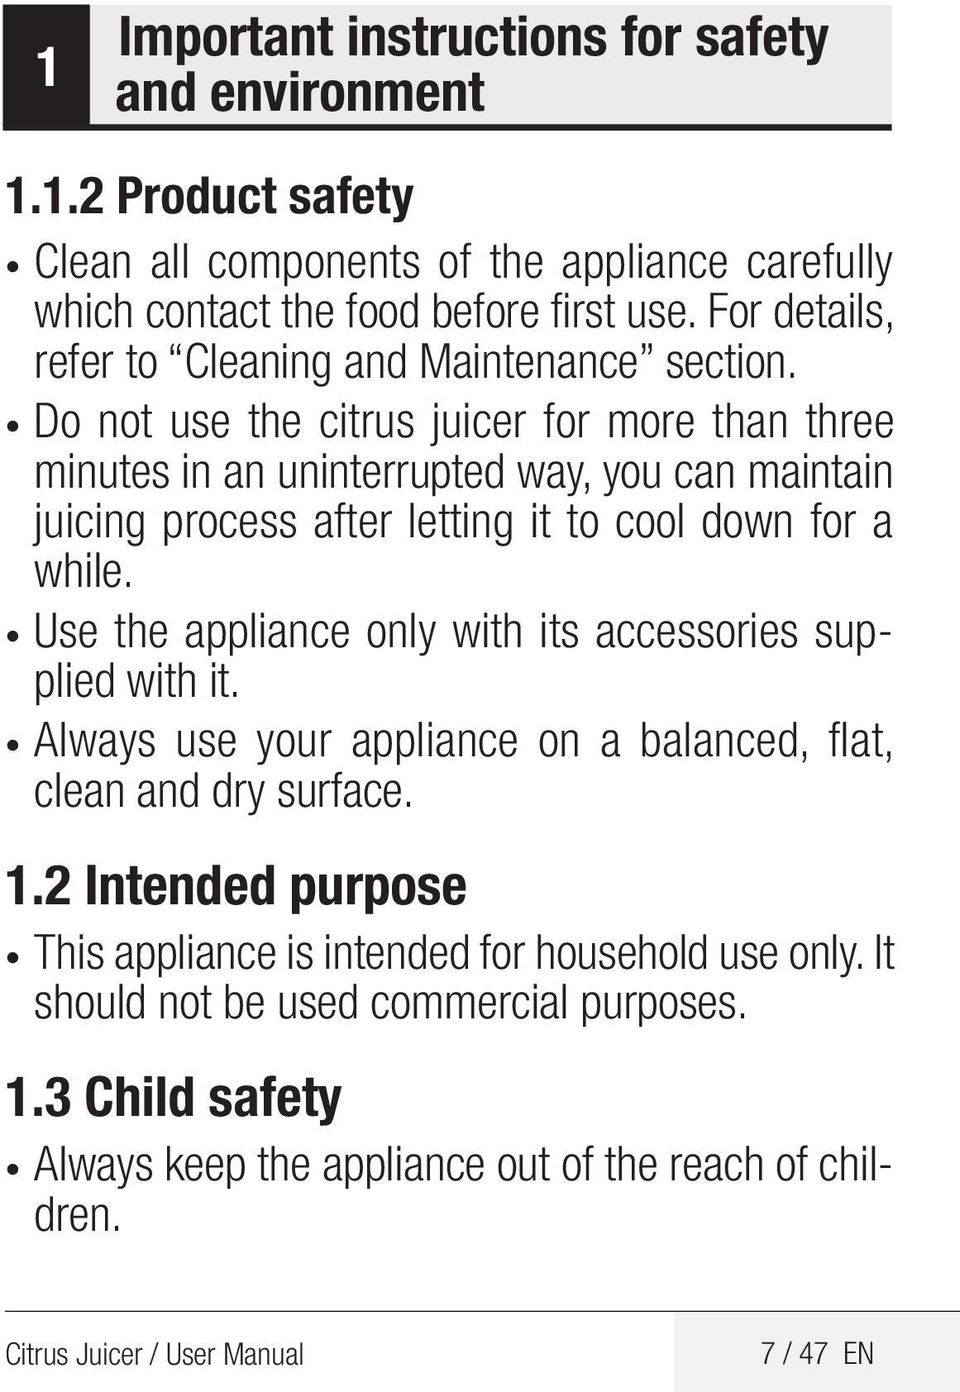 Do not use the citrus juicer for more than three minutes in an uninterrupted way, you can maintain juicing process after letting it to cool down for a while.